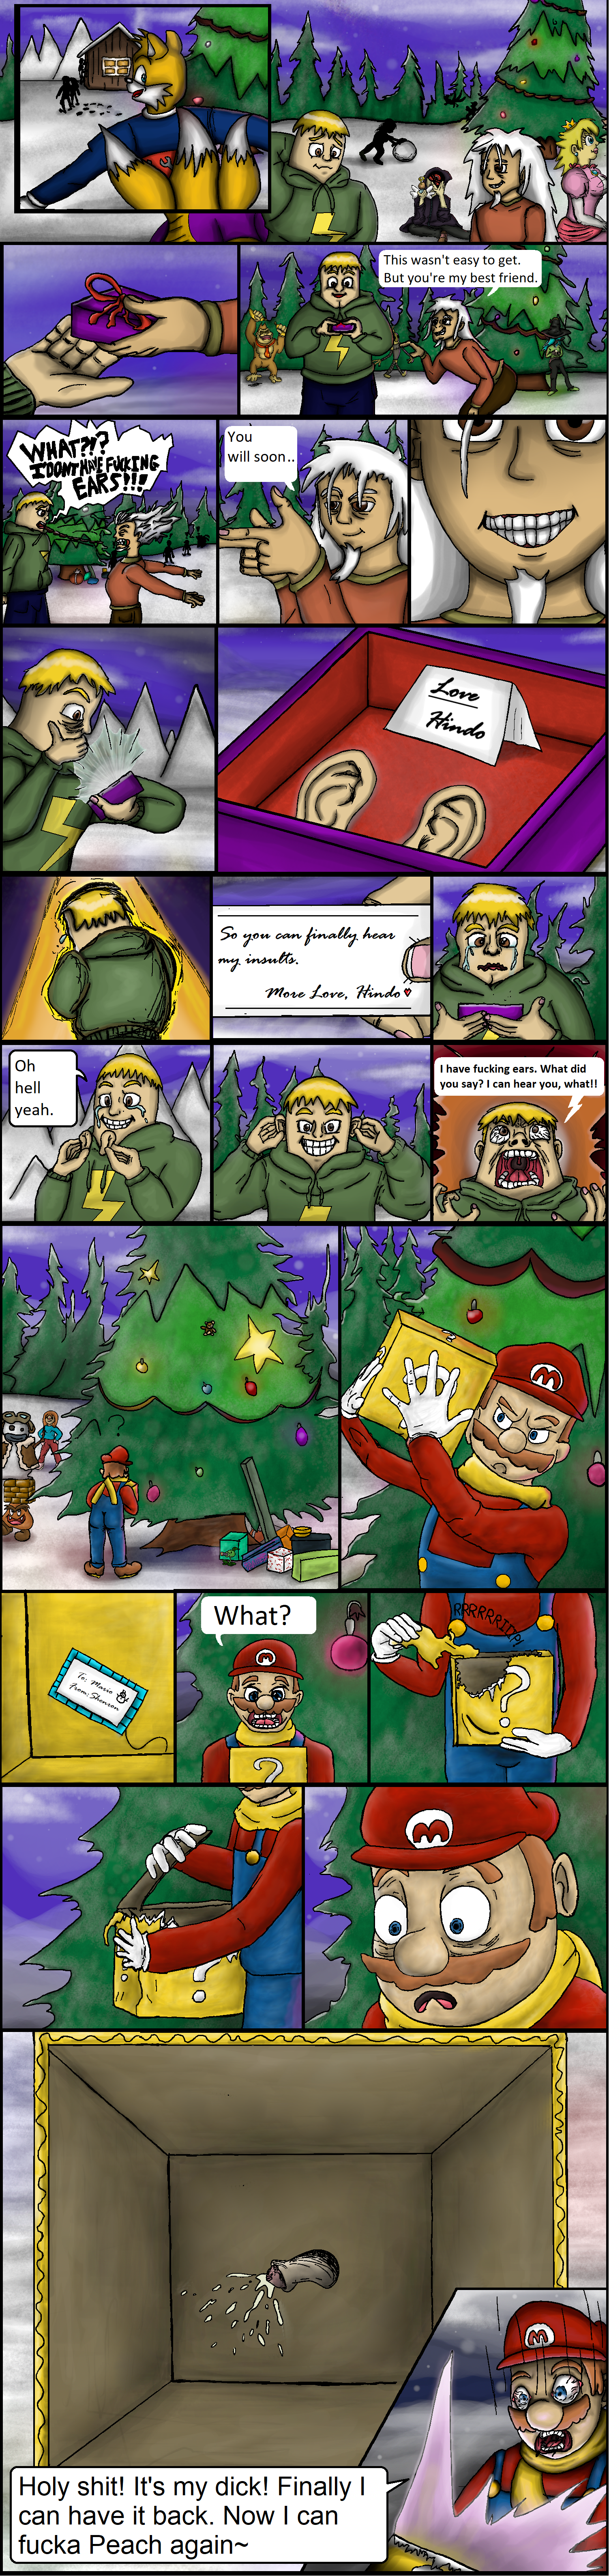 xmas/pg3.png. If you're seeing this, enable images. Or, perhaps we have a website issue. Try refreshing, if unsuccessful email commodorian@tailsgetstrolled.org with a detailed description of how you got here.